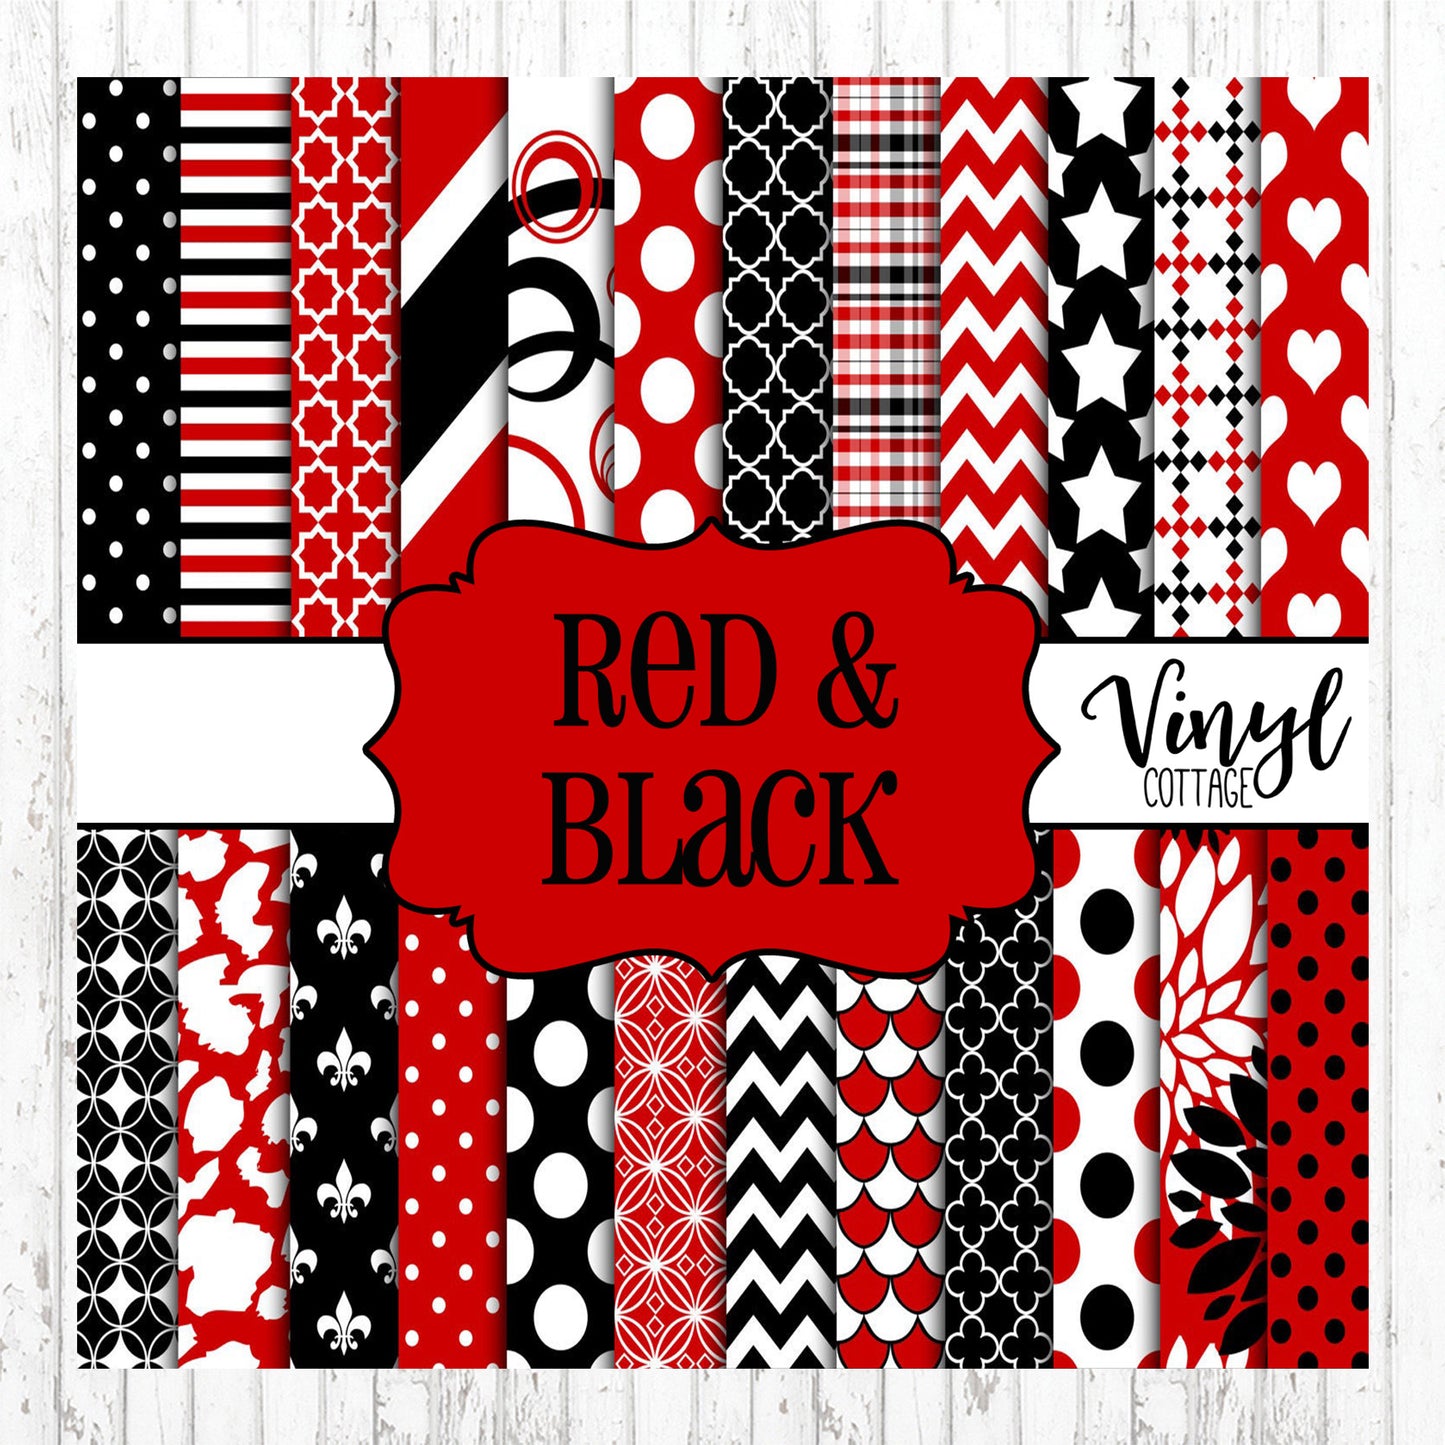 Red and Black Patterns